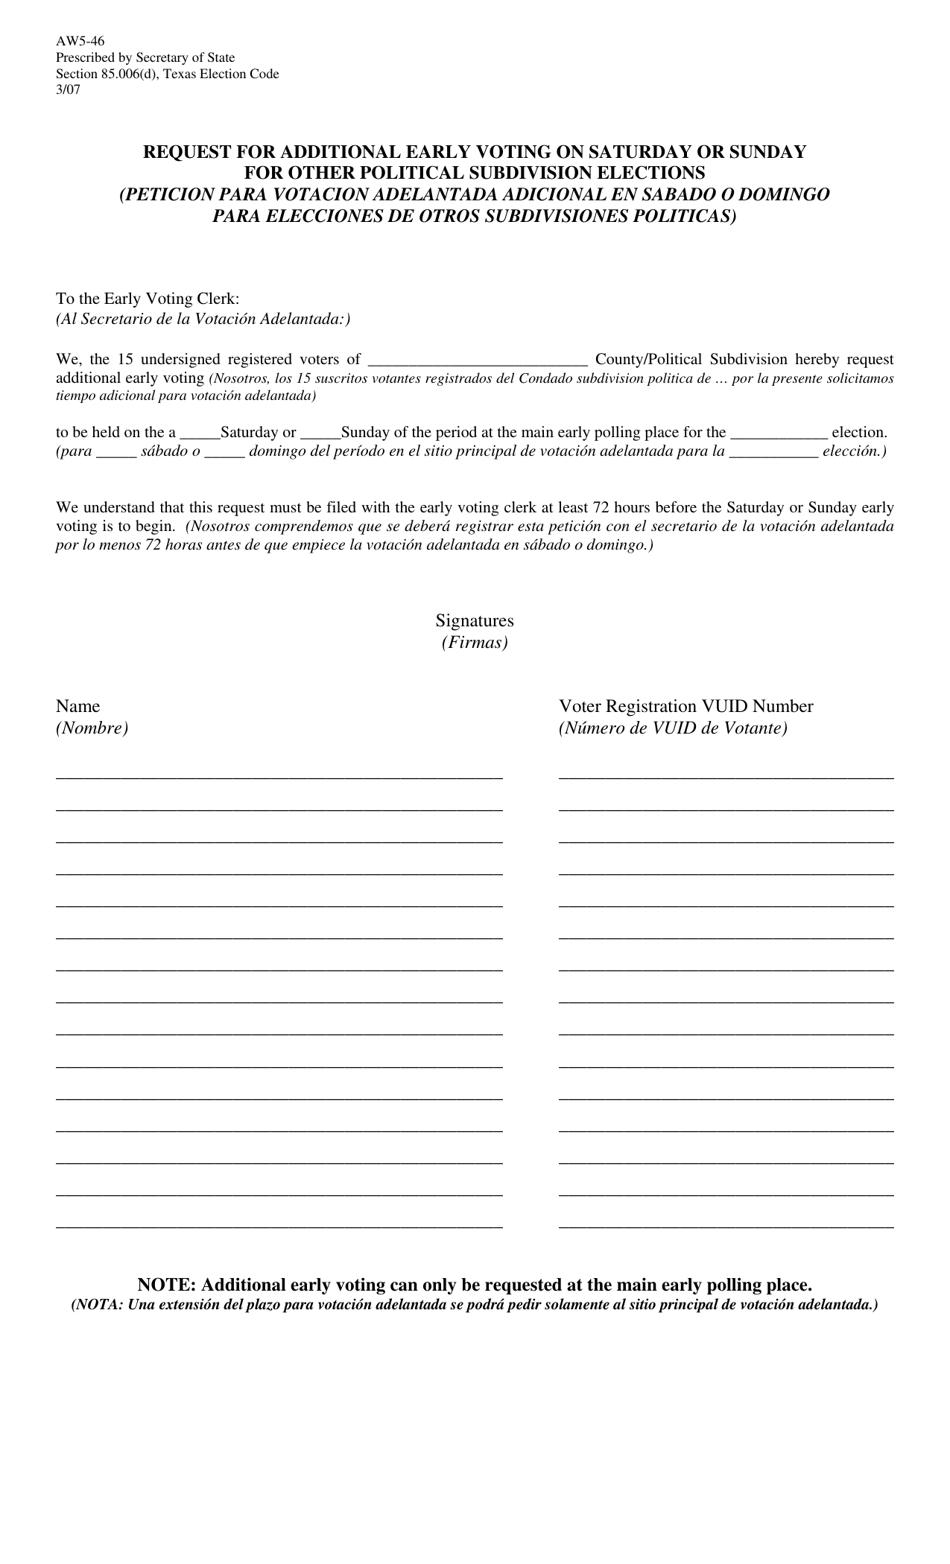 Form AW5-46 Request for Additional Early Voting on Saturday or Sunday for Other Political Subdivision Elections - Texas (English / Spanish), Page 1